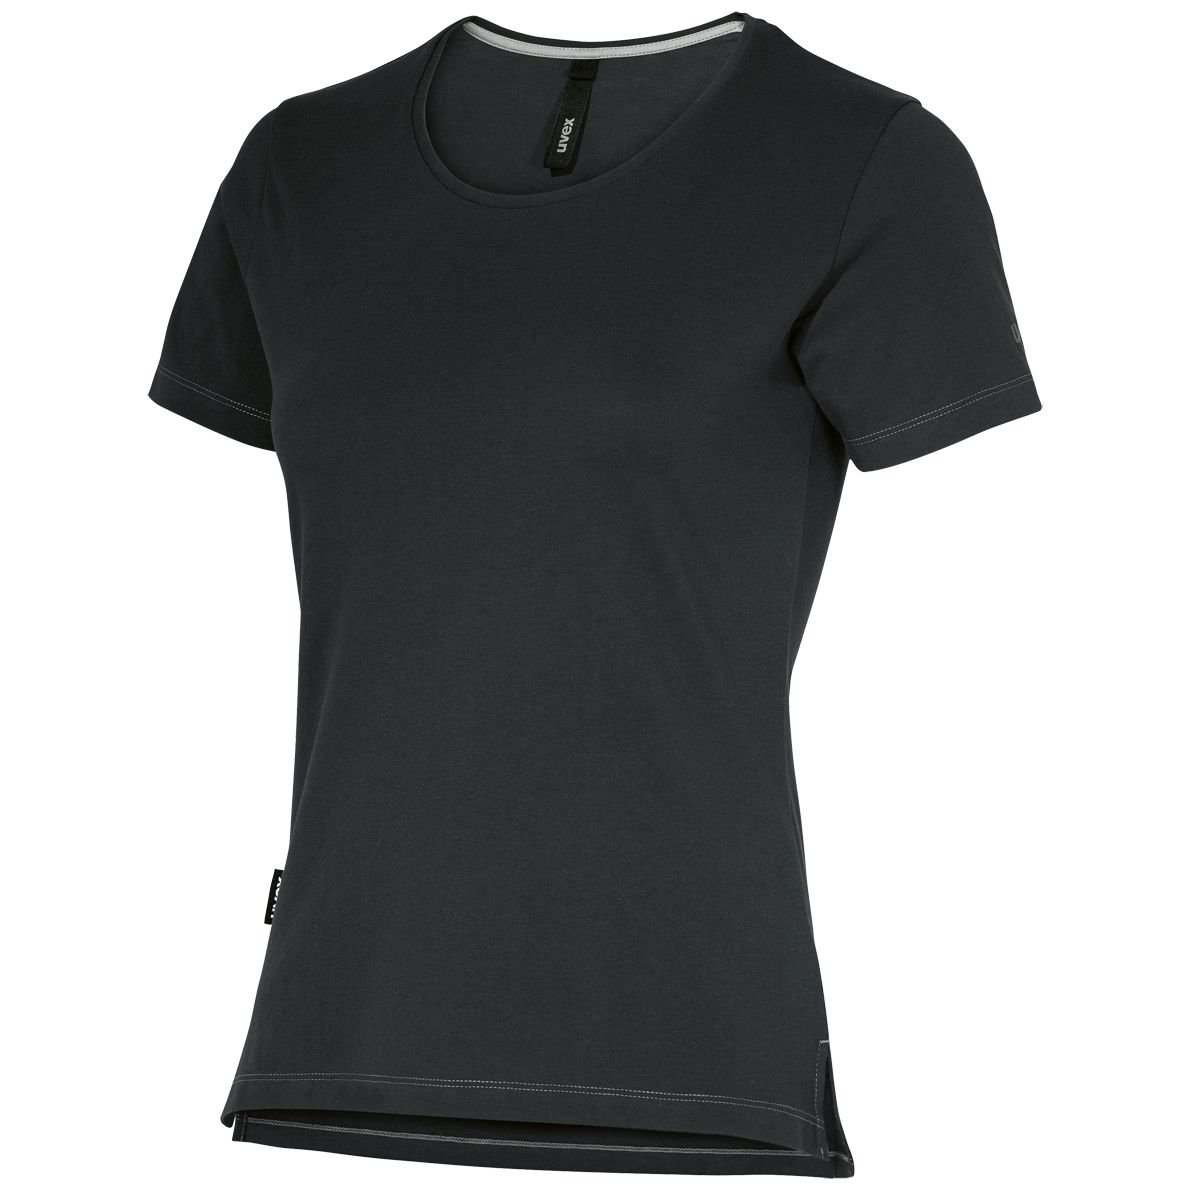 uvex tune-up work shirt for women - T-shirt for work - 50% cotton - Black - L